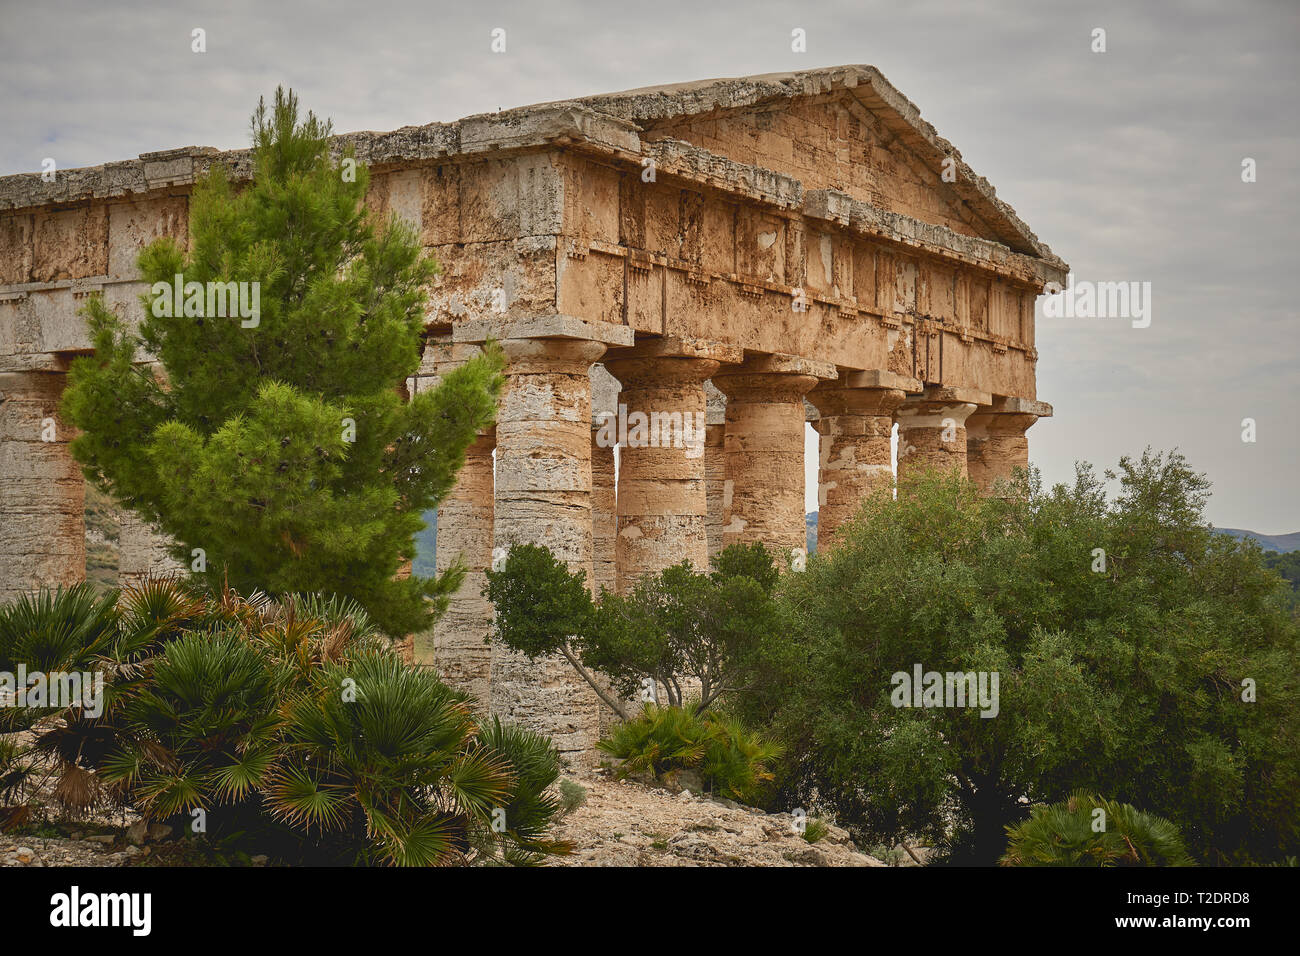 Calatafimi, Italy - October, 2018. The Doric temple of Segesta, on a hill just outside the site of the ancient city. Stock Photo